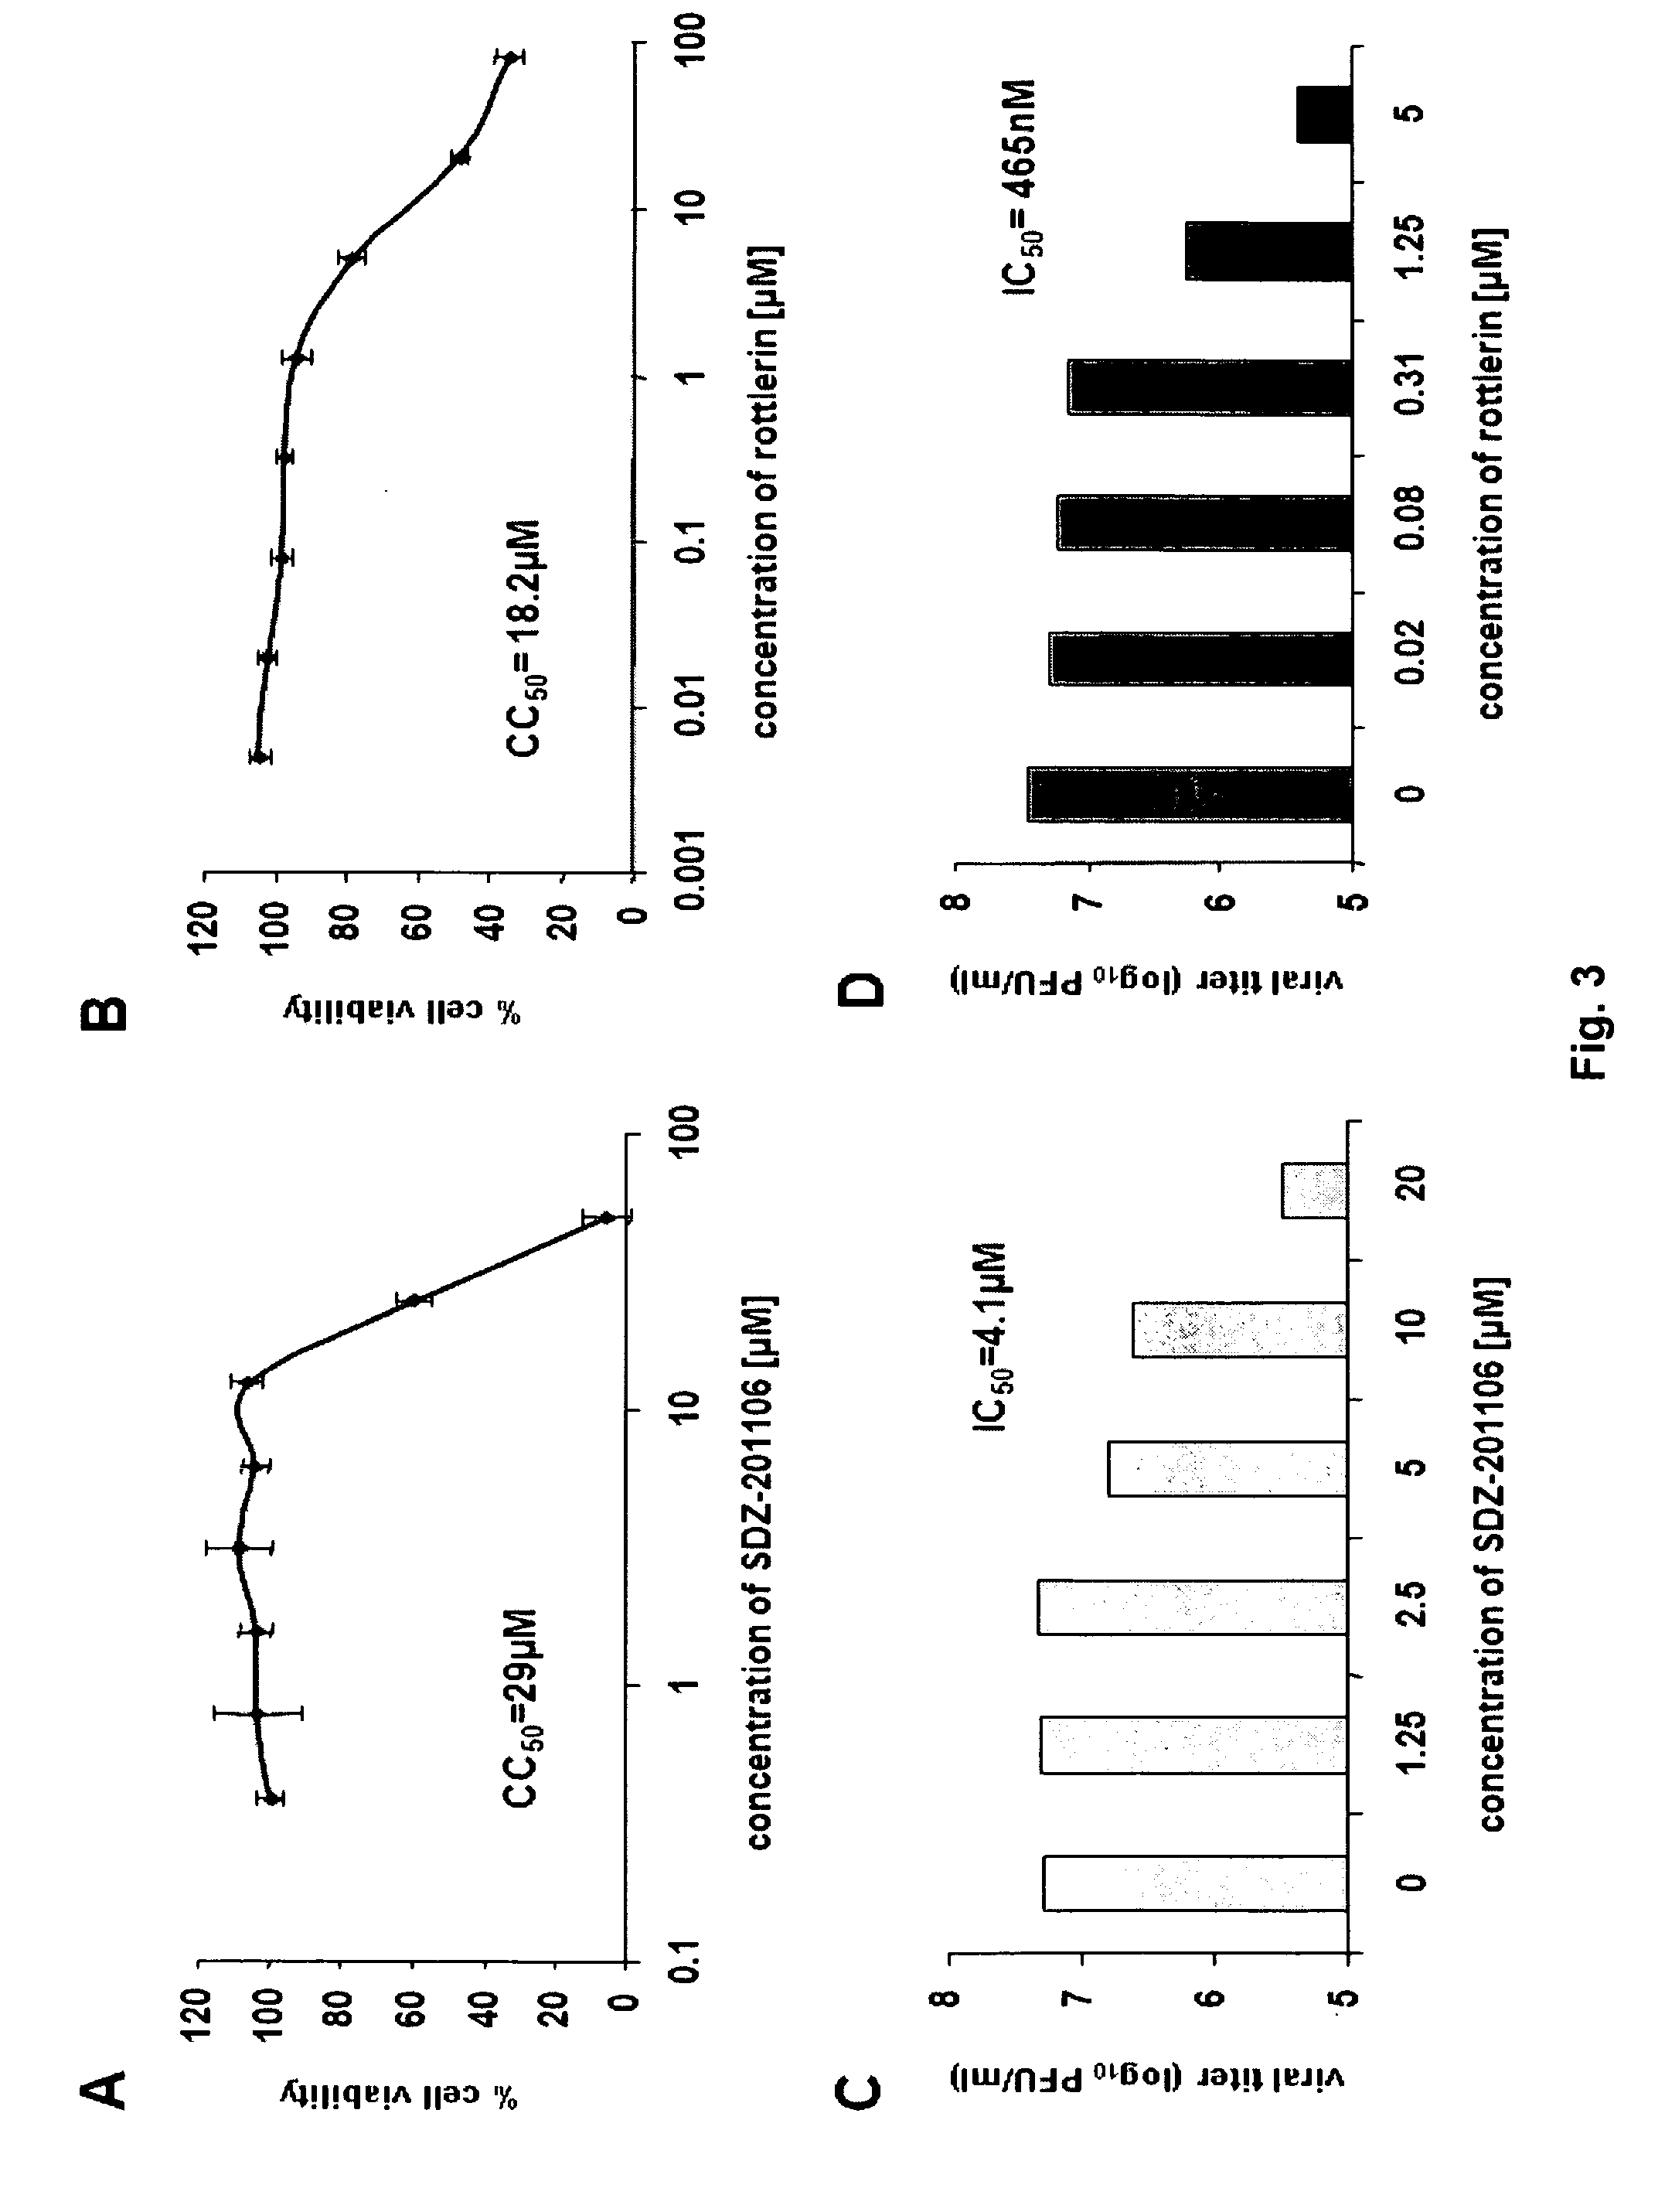 Compounds that modulate negative-sense, single-stranded RNA virus replication and uses thereof